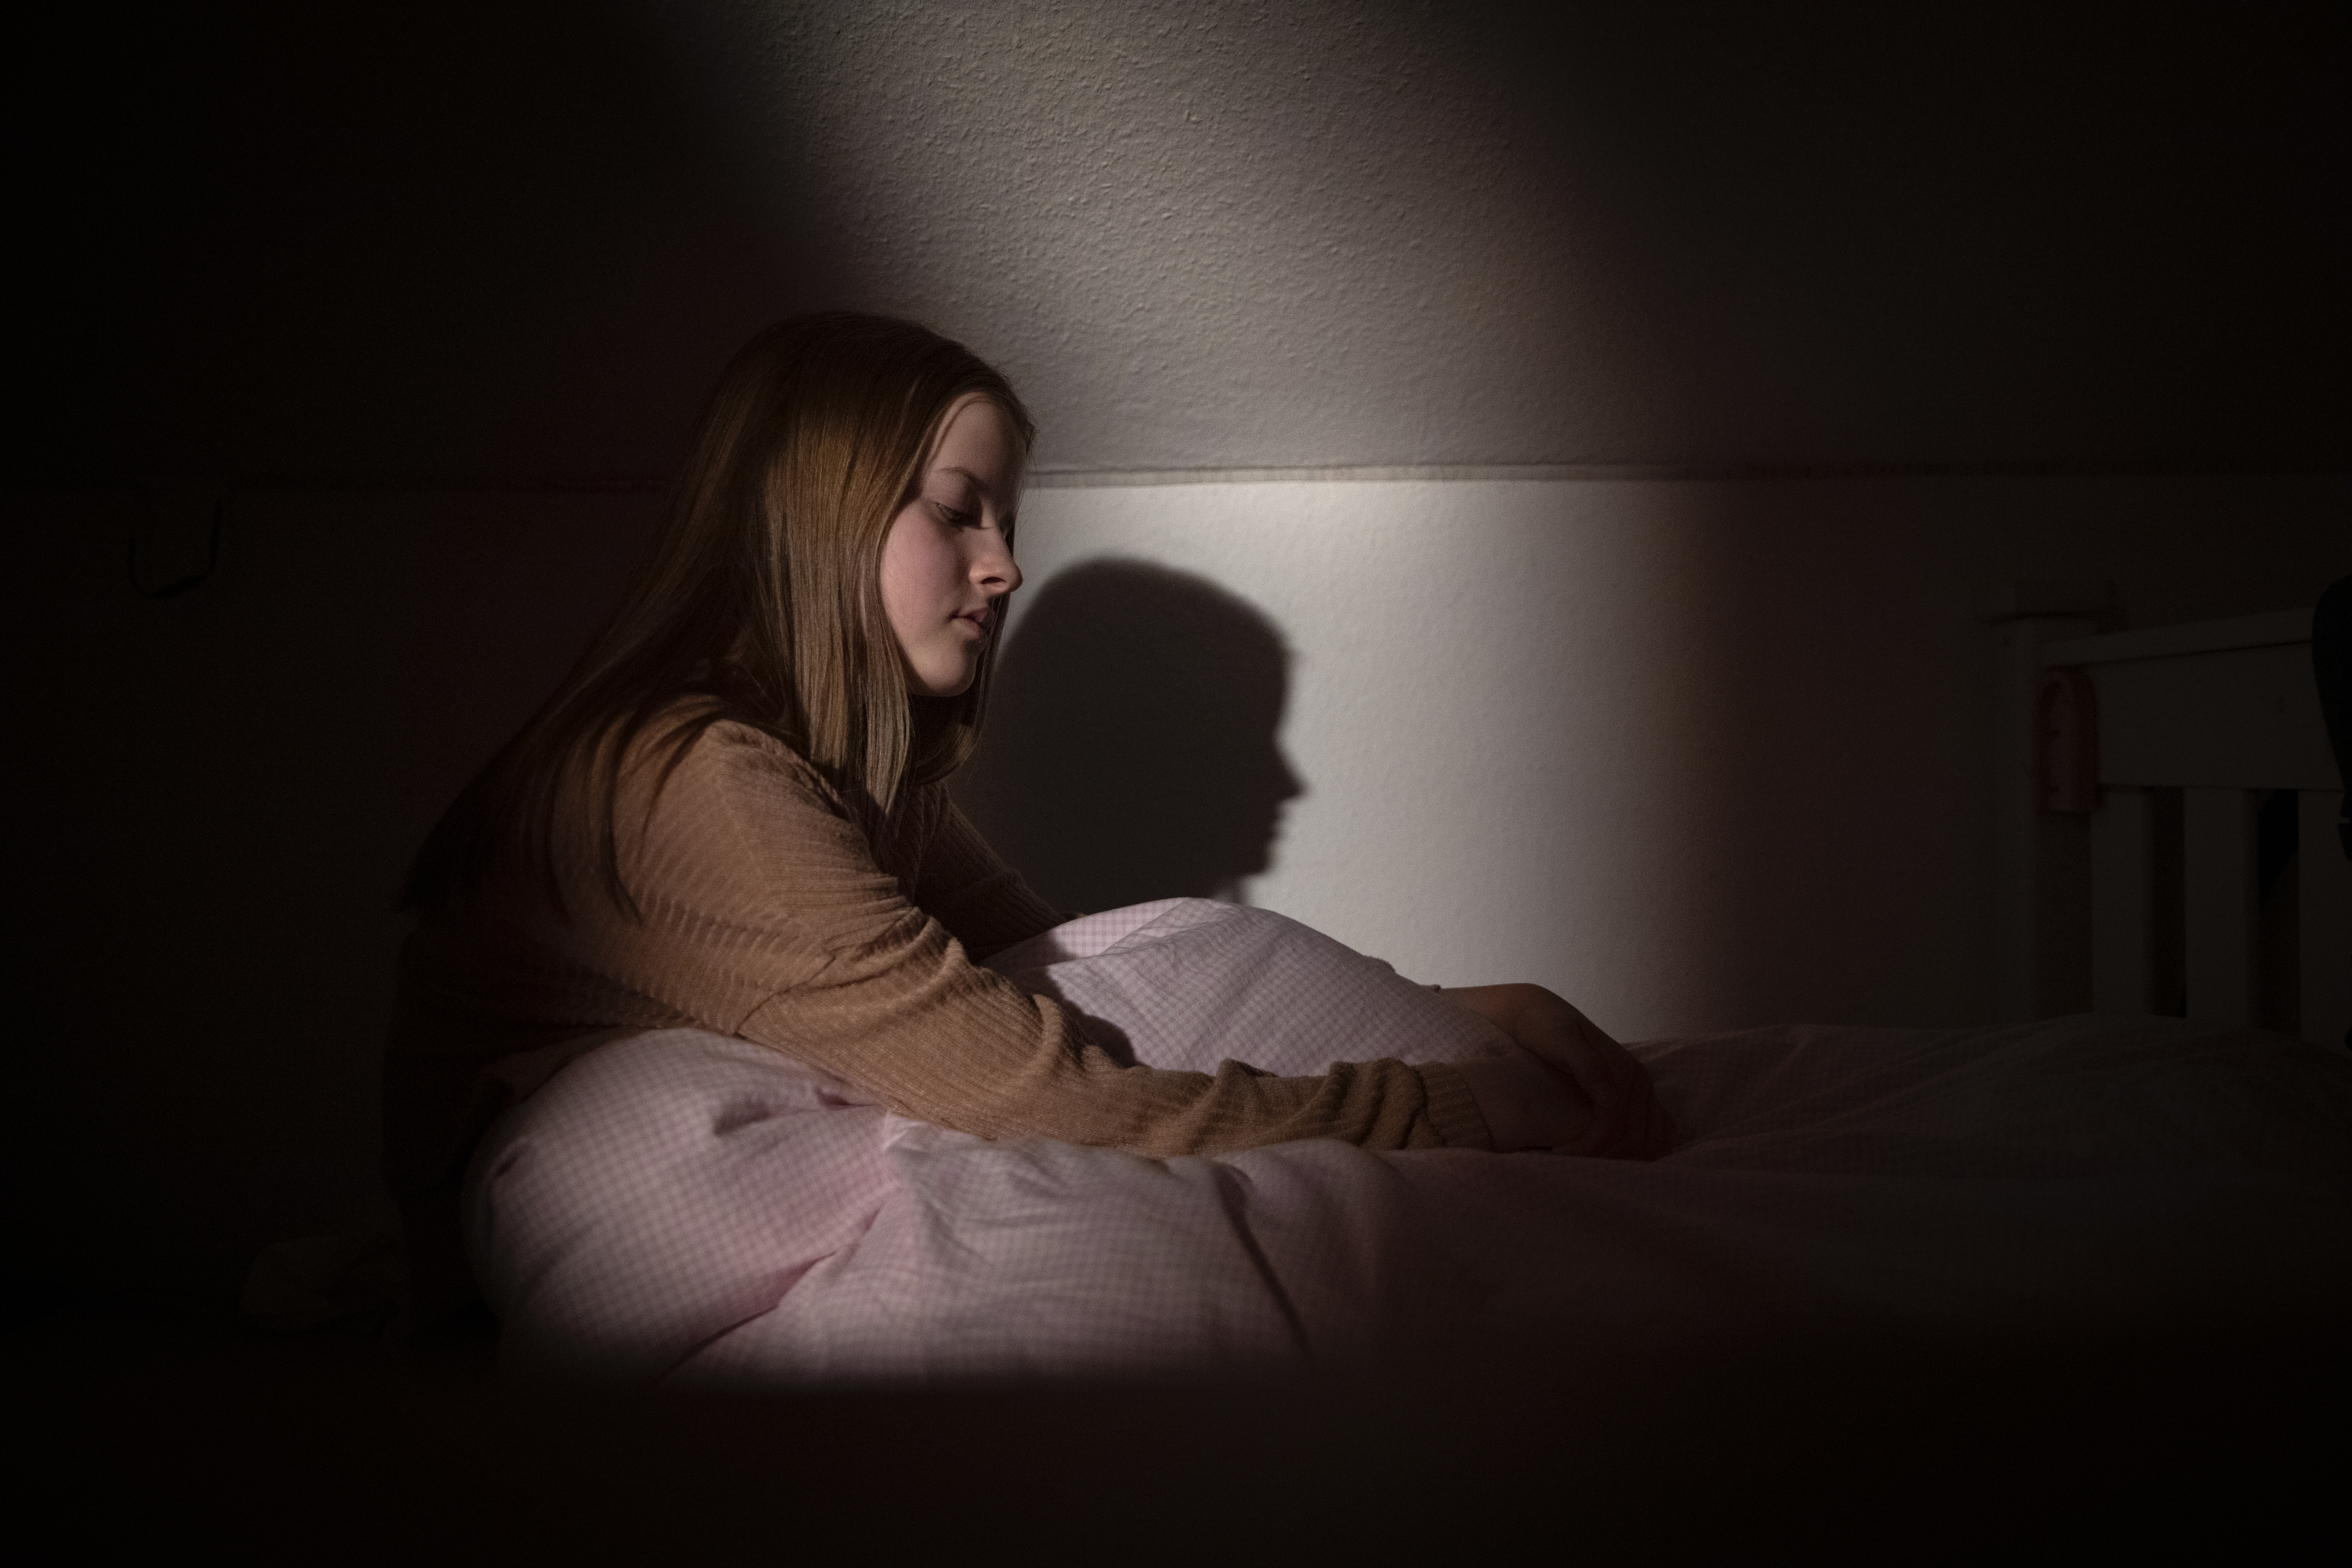 Teenage girl sitting up in bed at nighttime in low light with facial expression depicting despair and sadness | Source: Getty Images